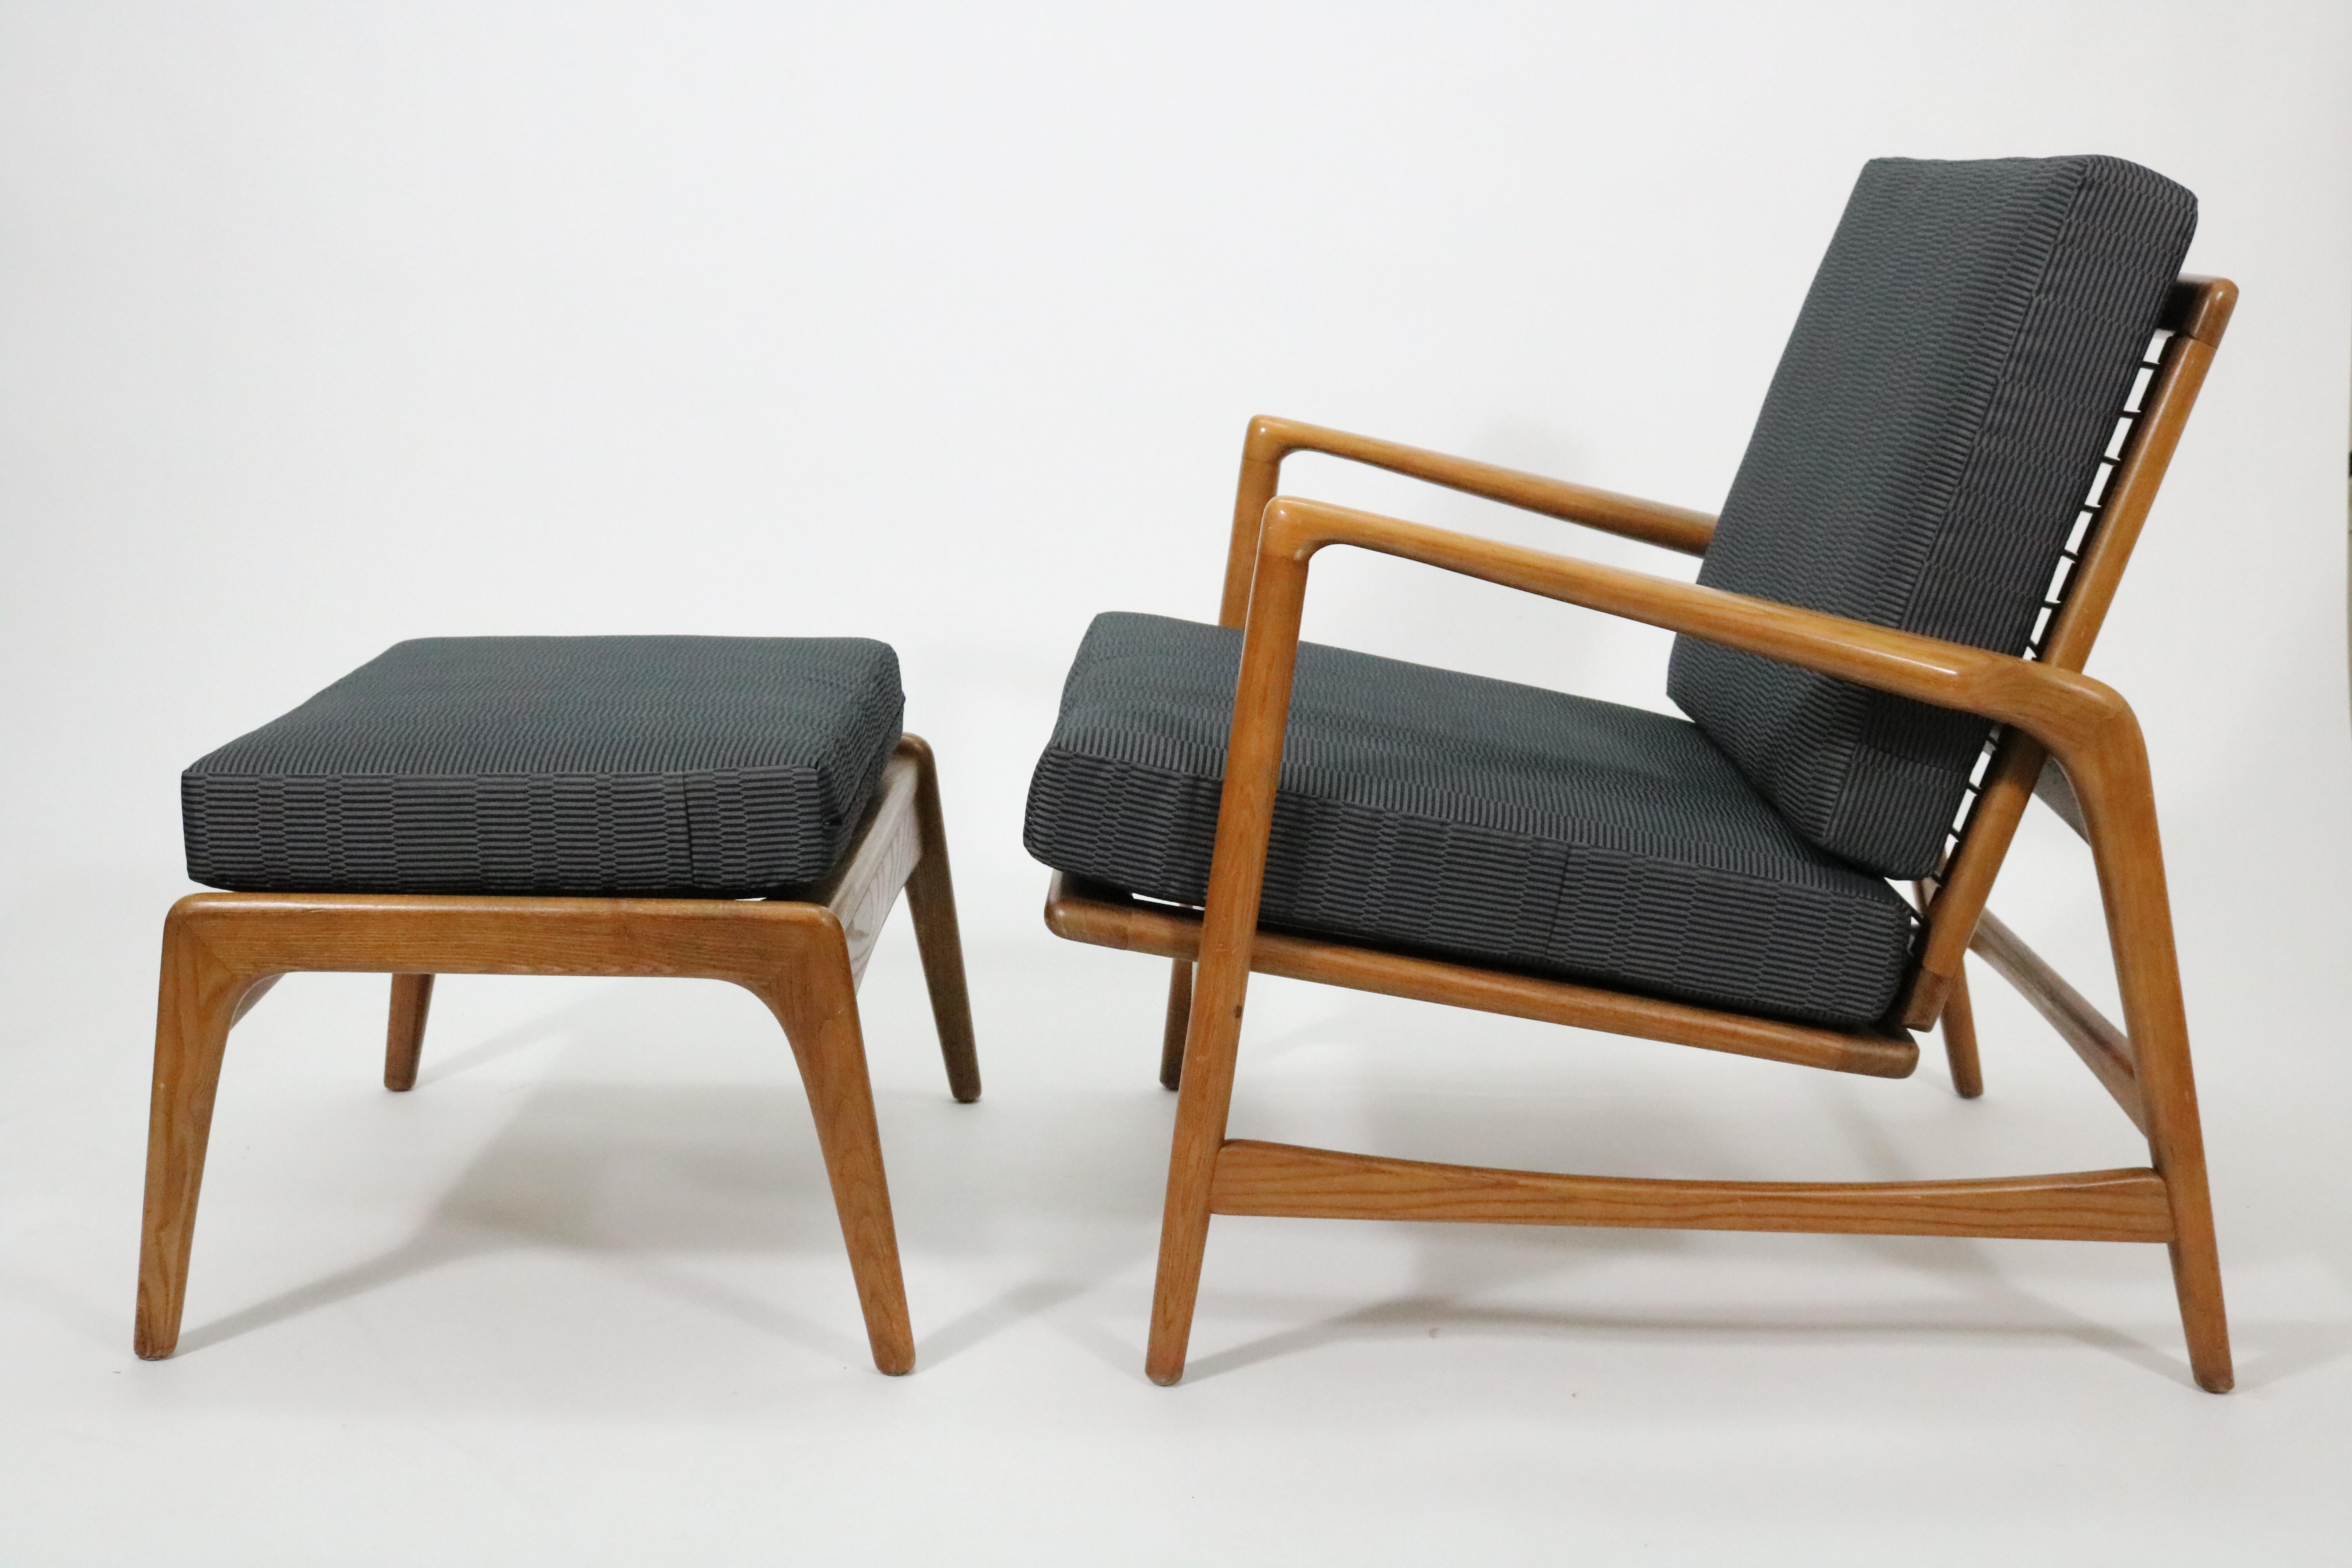 A rare lounge chair and ottoman by John Fossum for Shield Chair Company of California in the manner of Ib Kofod-Larsen.

In honey walnut with adjustable recline.

Recently reupholstered. Wonderful vintage condition.

John K. Fossum grew up in